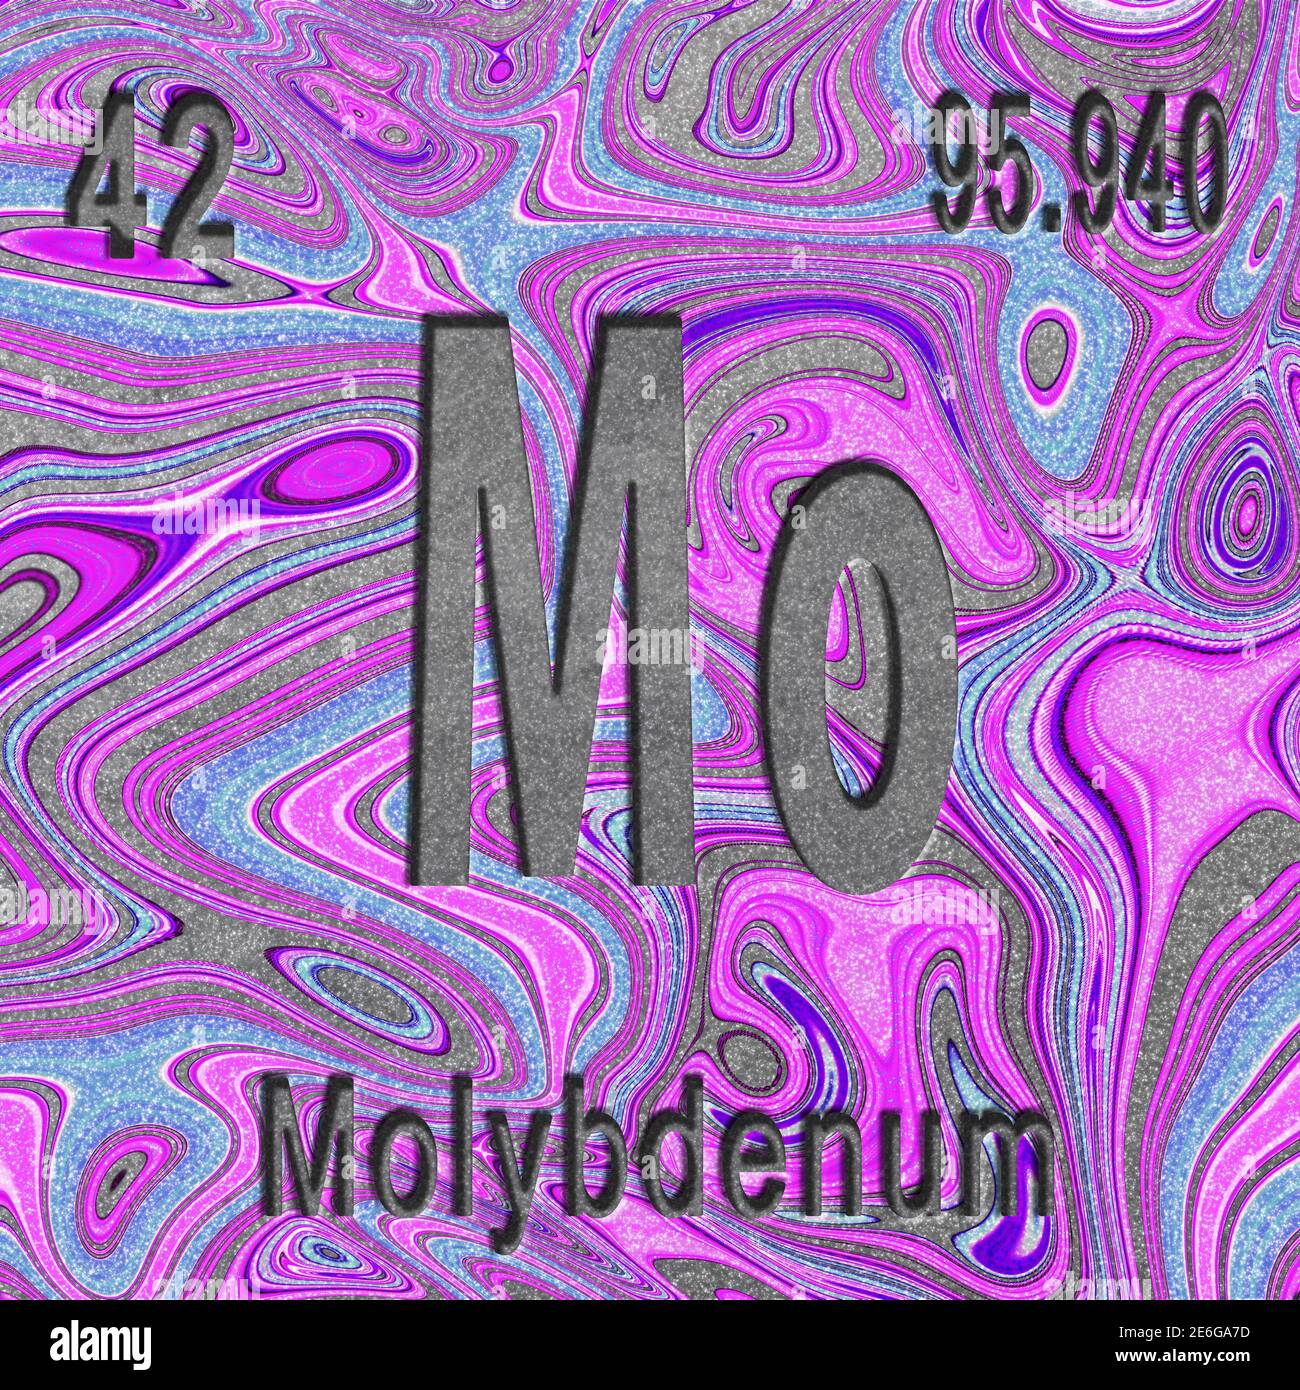 Molybdenum chemical element, Sign with atomic number and atomic weight, purple background, Periodic Table Element Stock Photo